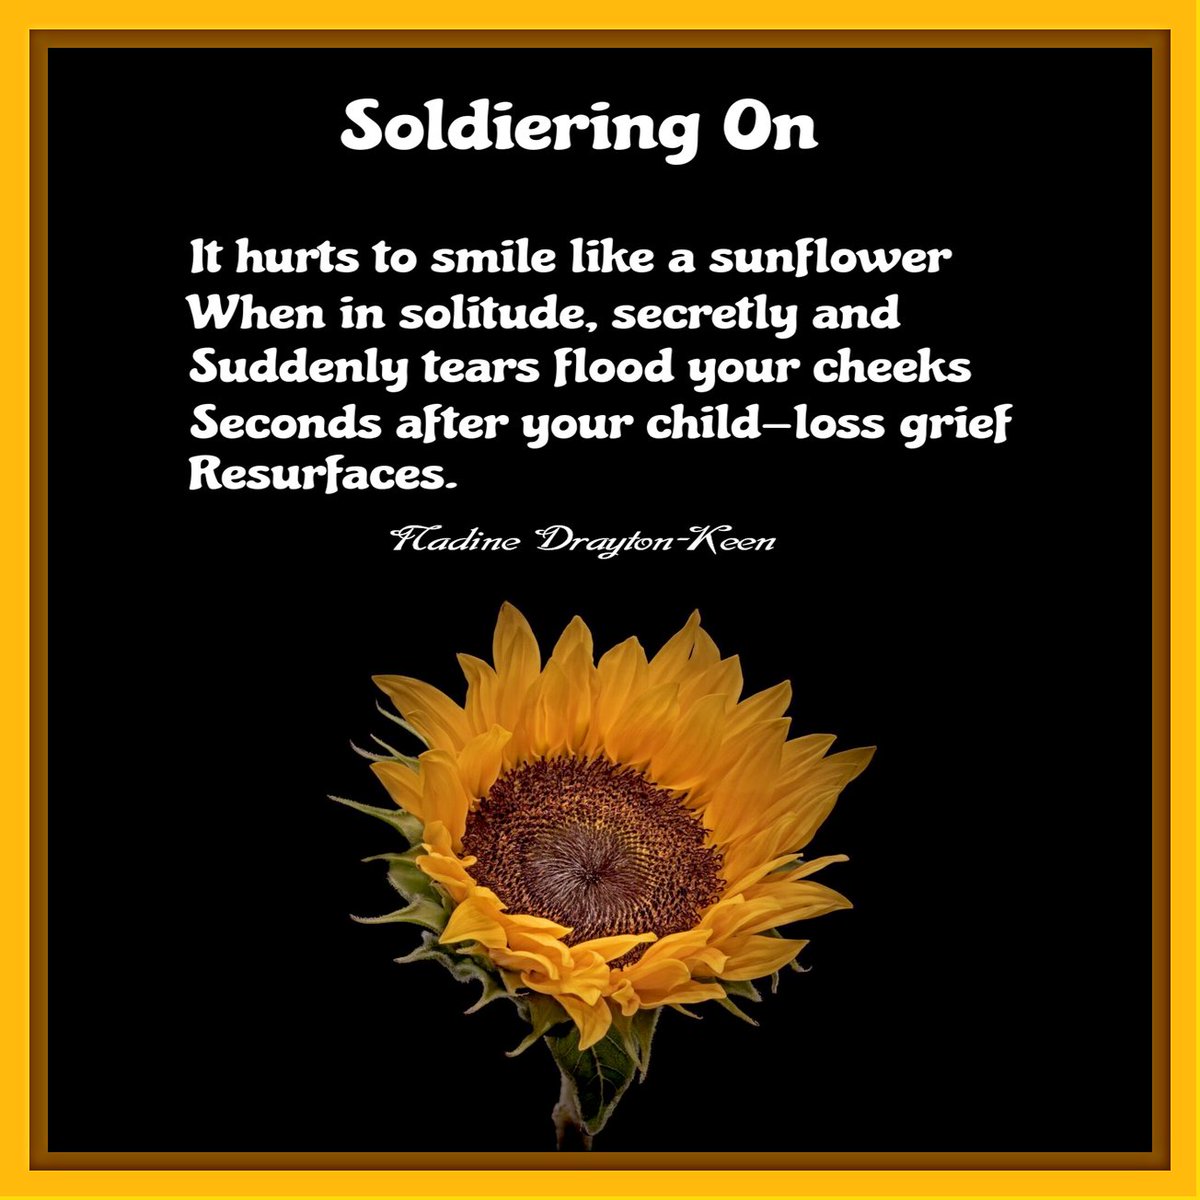 Soldiering On

It hurts to smile like a sunflower
When in solitude, secretly and
Suddenly tears flood your cheeks
Seconds after your child-loss grief
Resurfaces.

- a poem by Nadine Drayton-Keen (a.k.a., Overcomer Keen)

composed July 23, 2022 https://t.co/bFlm5p3Prs